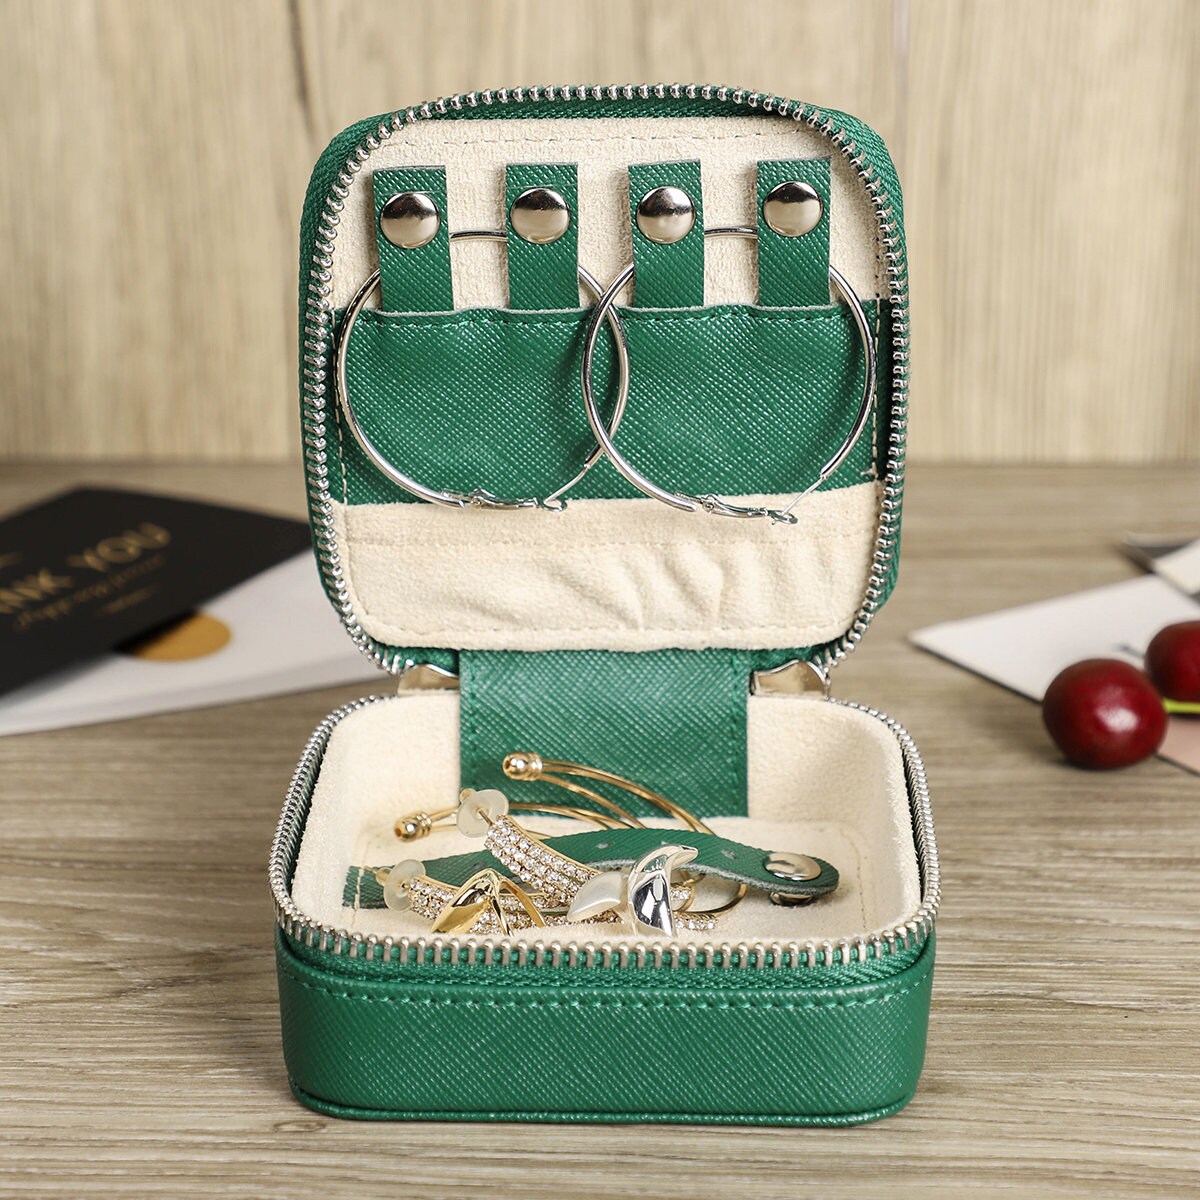 Personalized Leather Jewelry Box, Jewelry Travel Case, Western Jewelry  Case,travel Accessories Organizer, Customized Gift for Men Women 